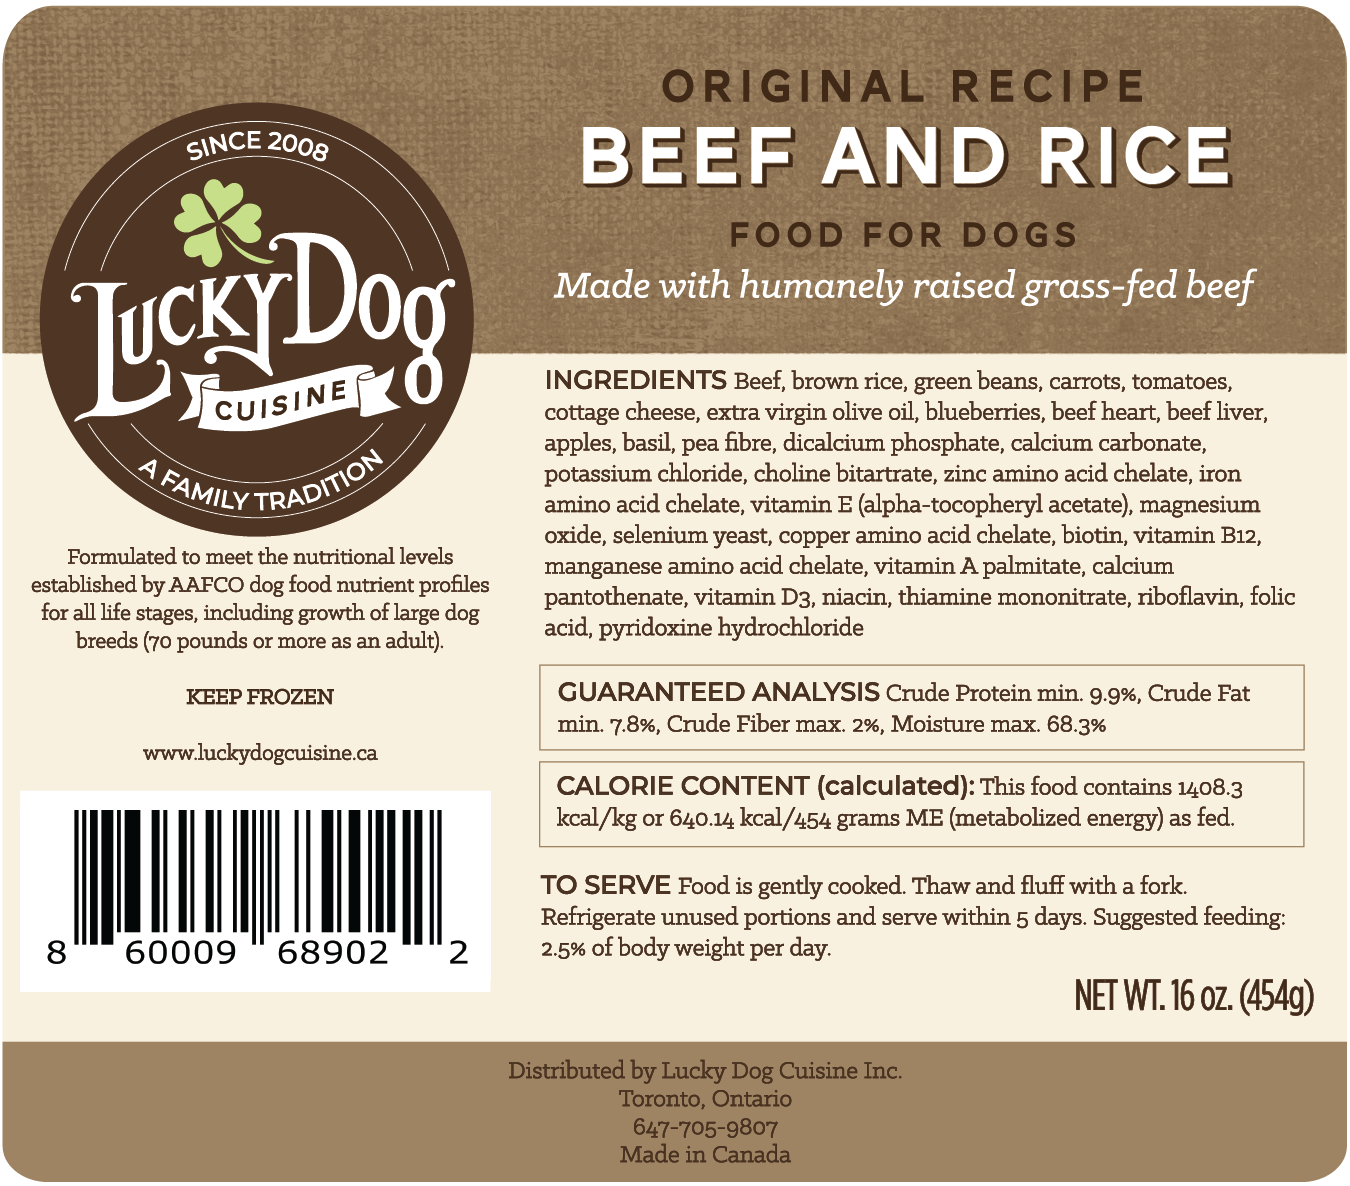 Beef and rice label with ingredient list and guaranteed analysis